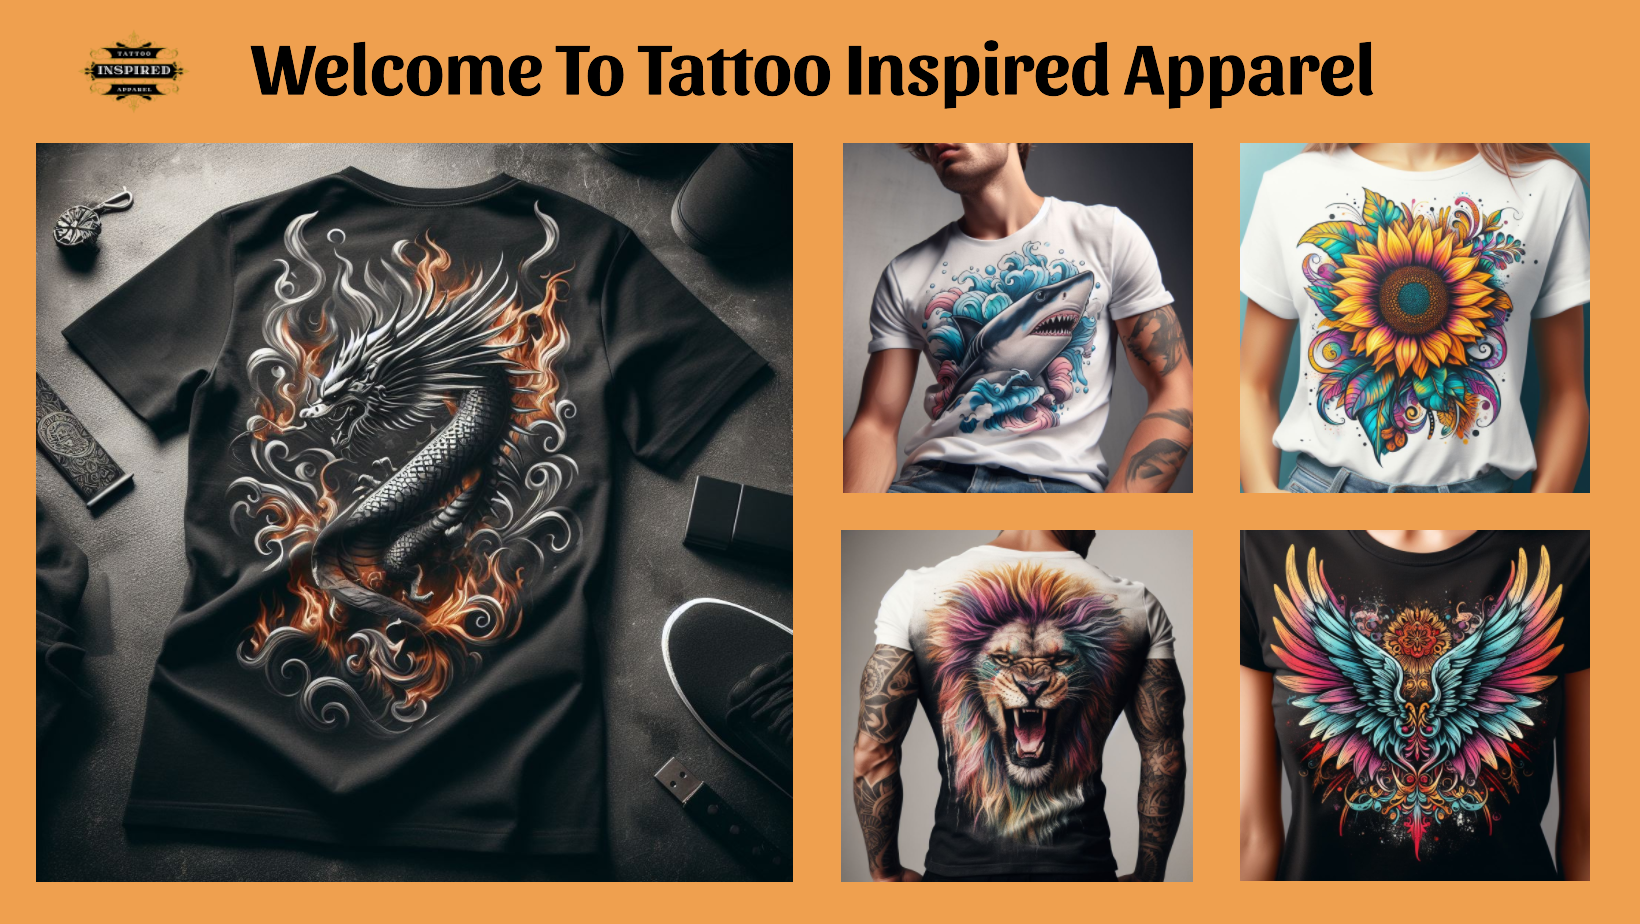 Harley-Davidson's New Tattoo Inspired Clothing Line | Motorcycle.com